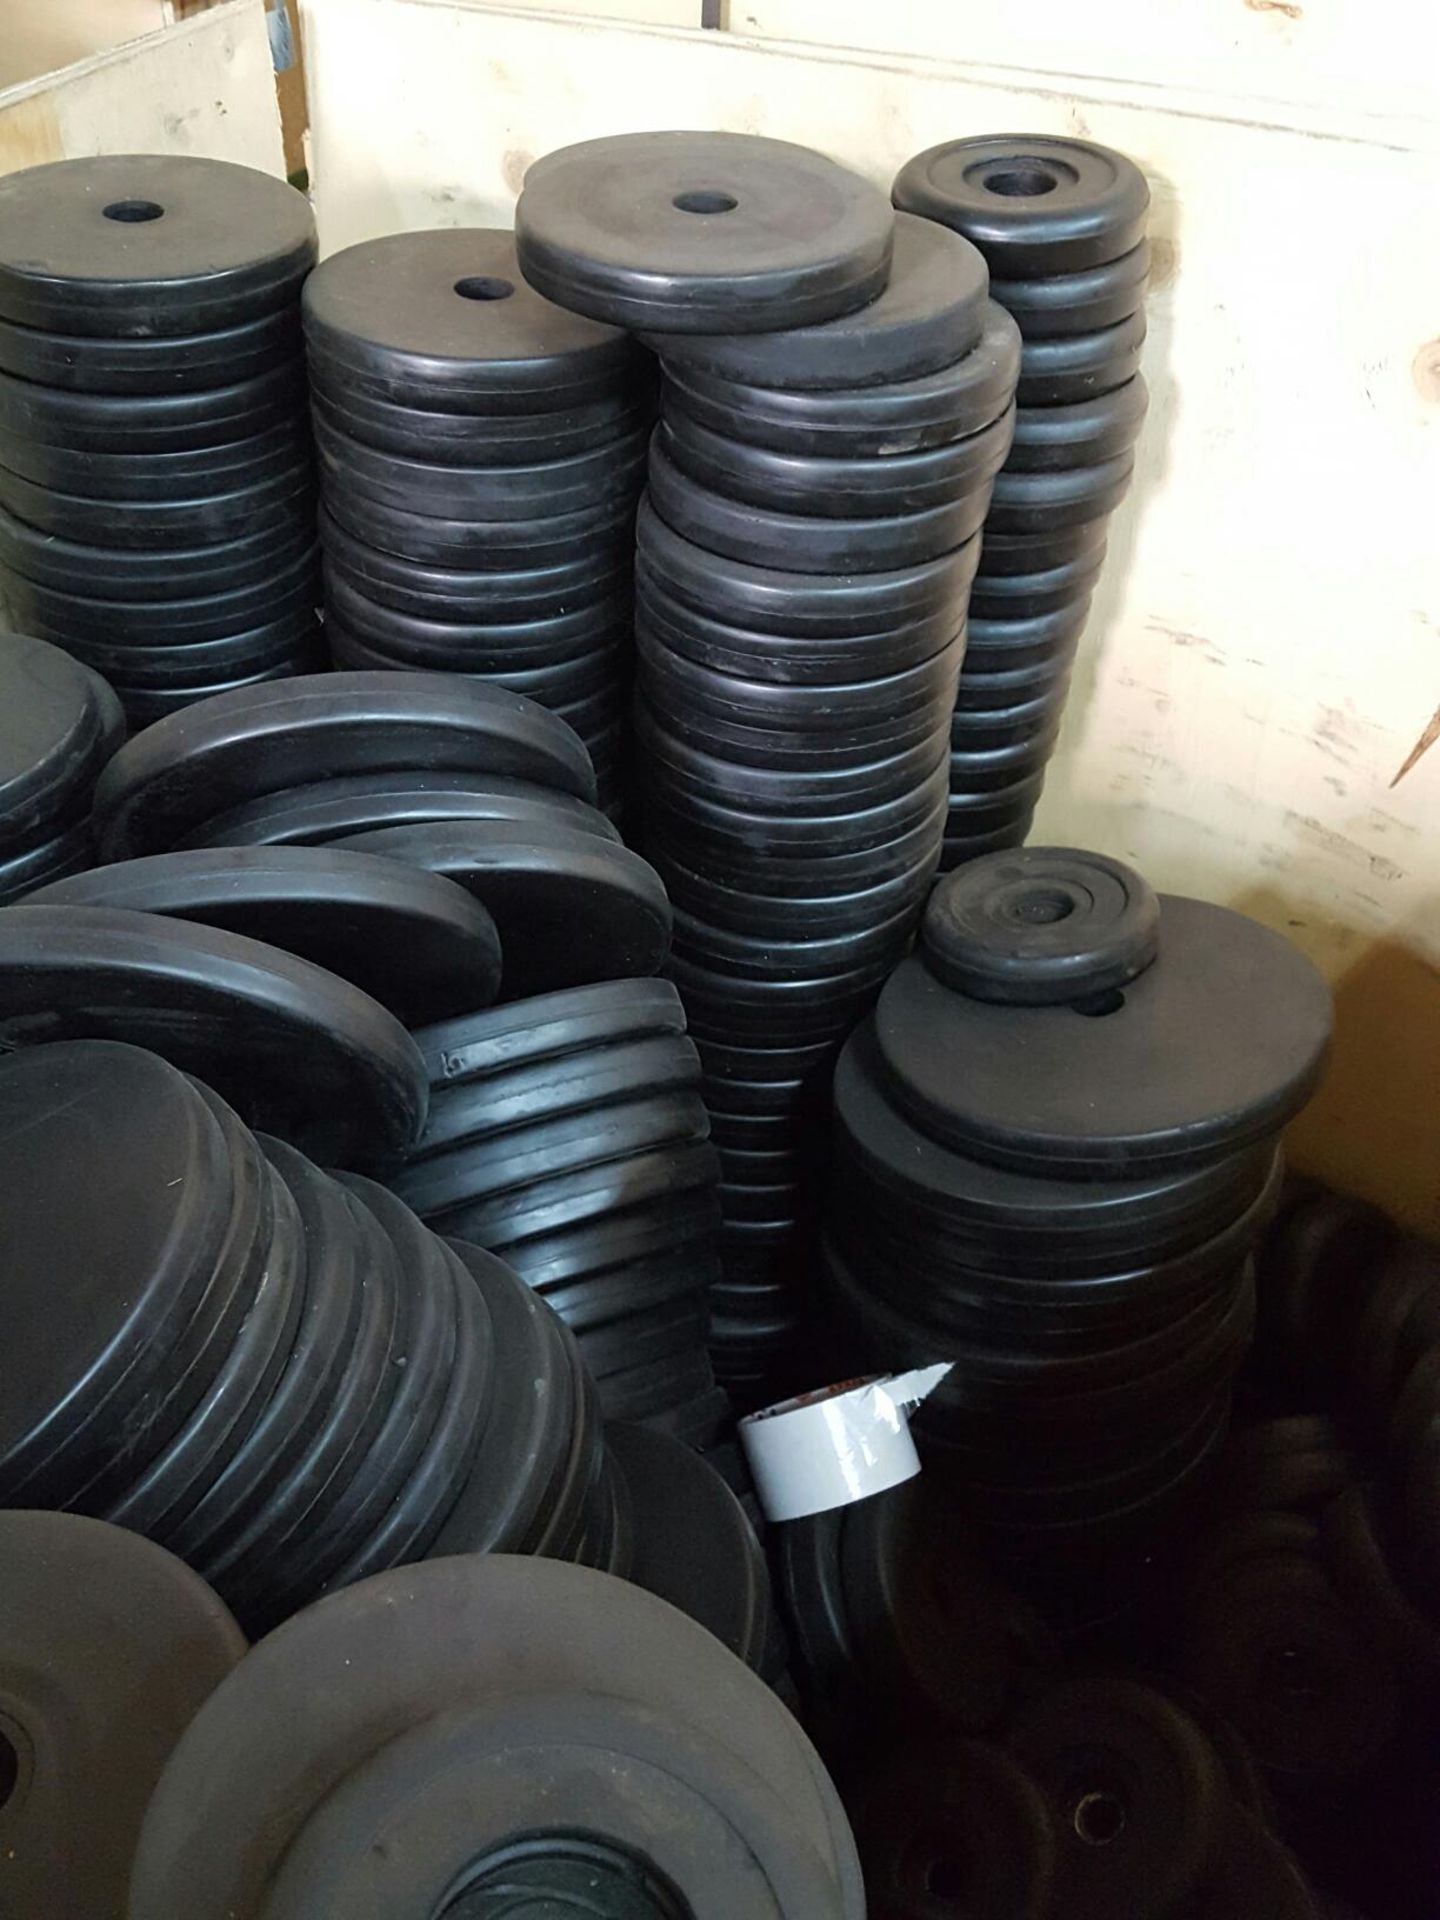 Joblot of Brand New Cast Iron & Rubber Dumbbells, Discs, Plates and Handles. Low 10% Buyers Premium - Image 3 of 5